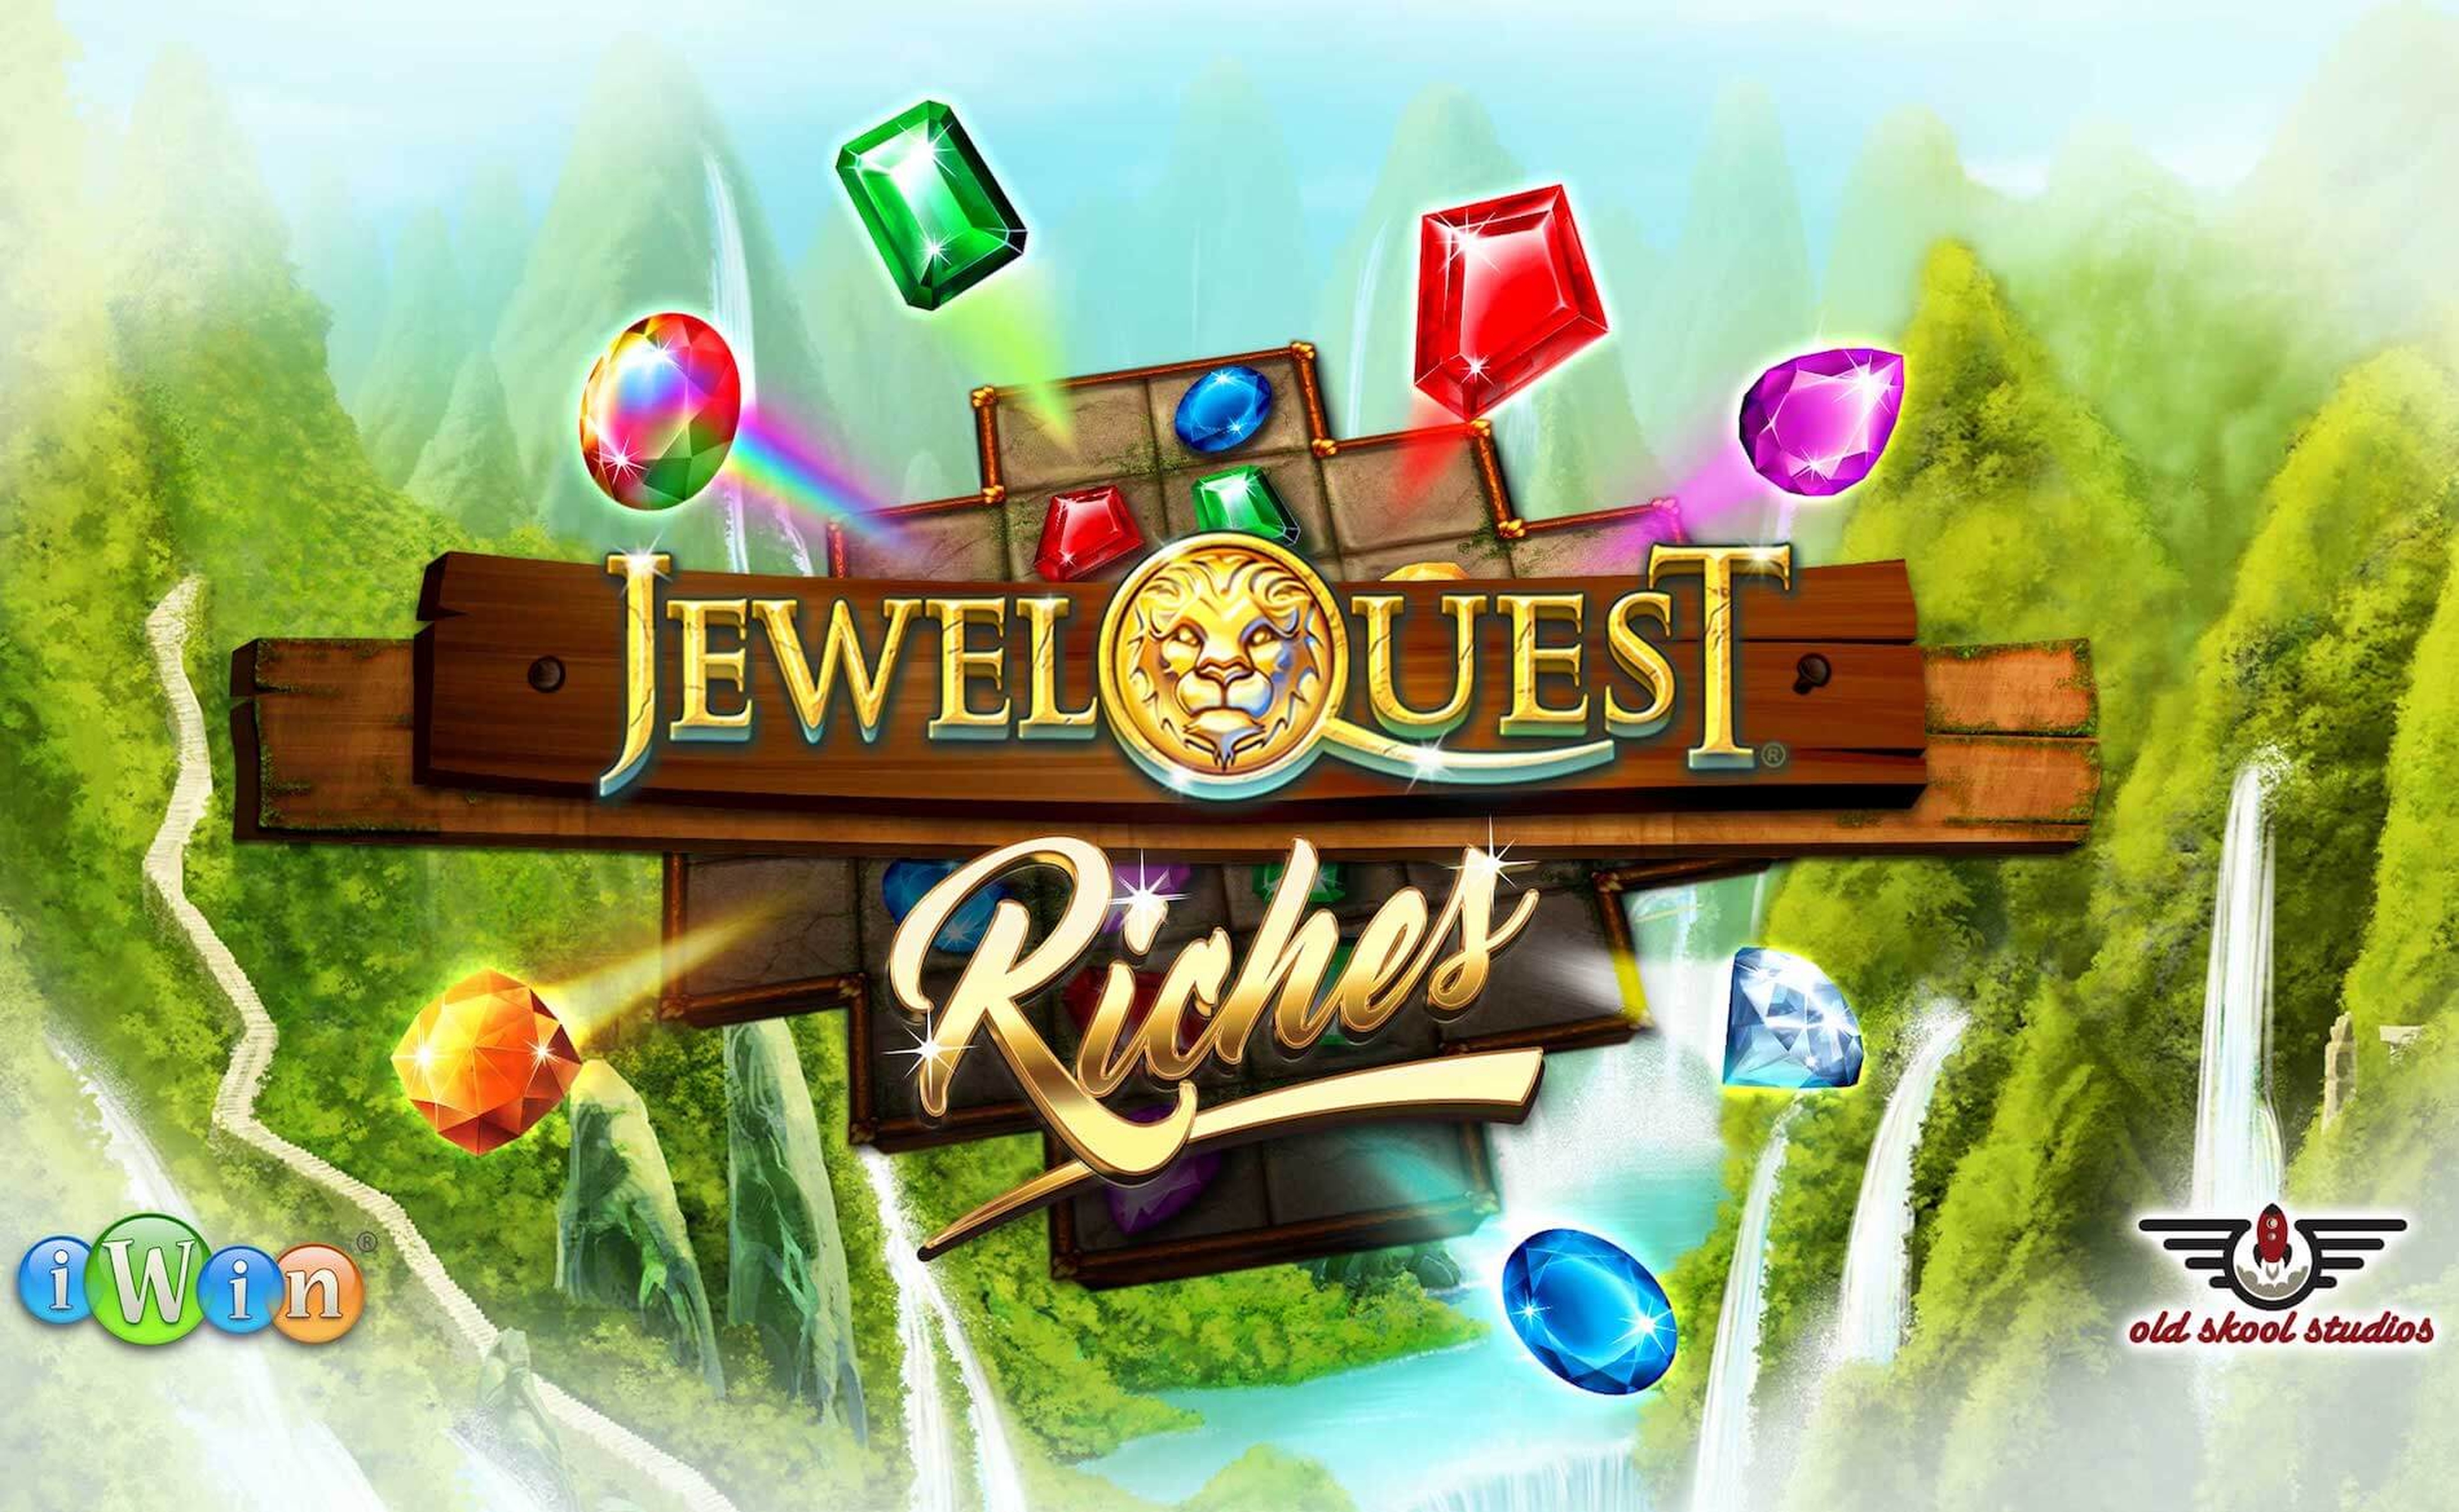 The Jewel Quest Riches Online Slot Demo Game by Old Skool Studios